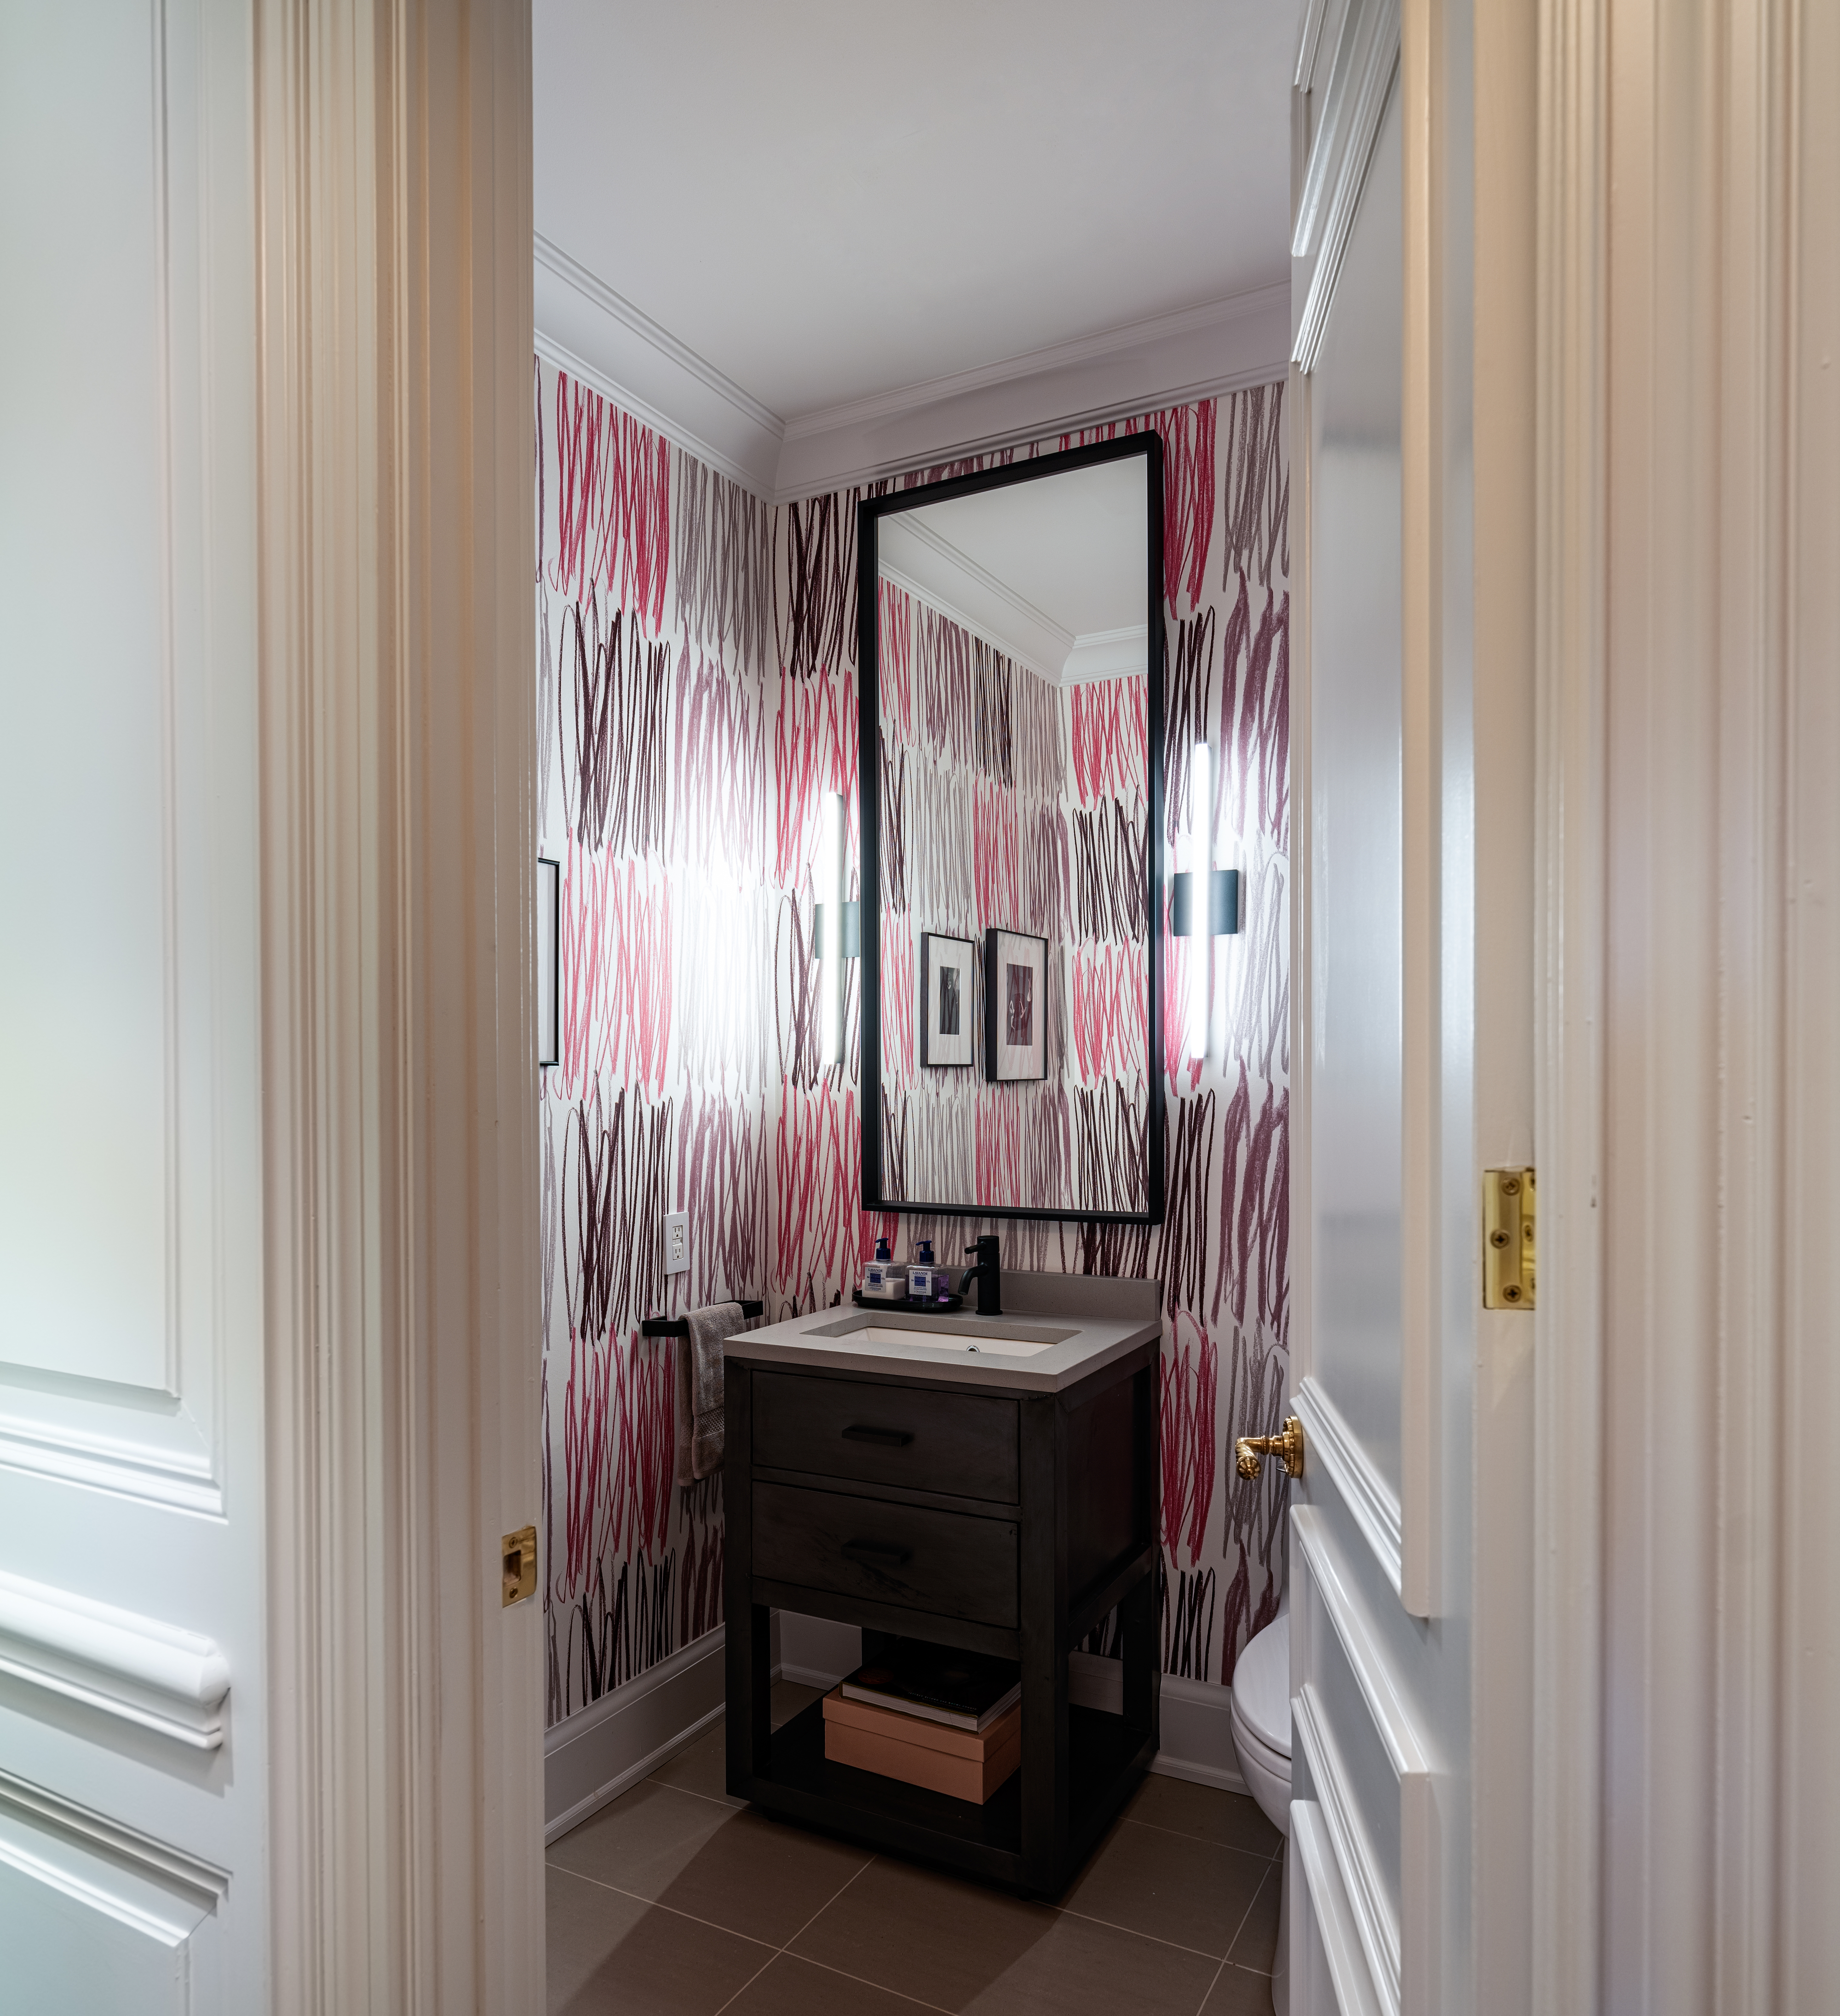 A modern bathroom with a patterned wallpaper, vanity cabinet, and large mirror